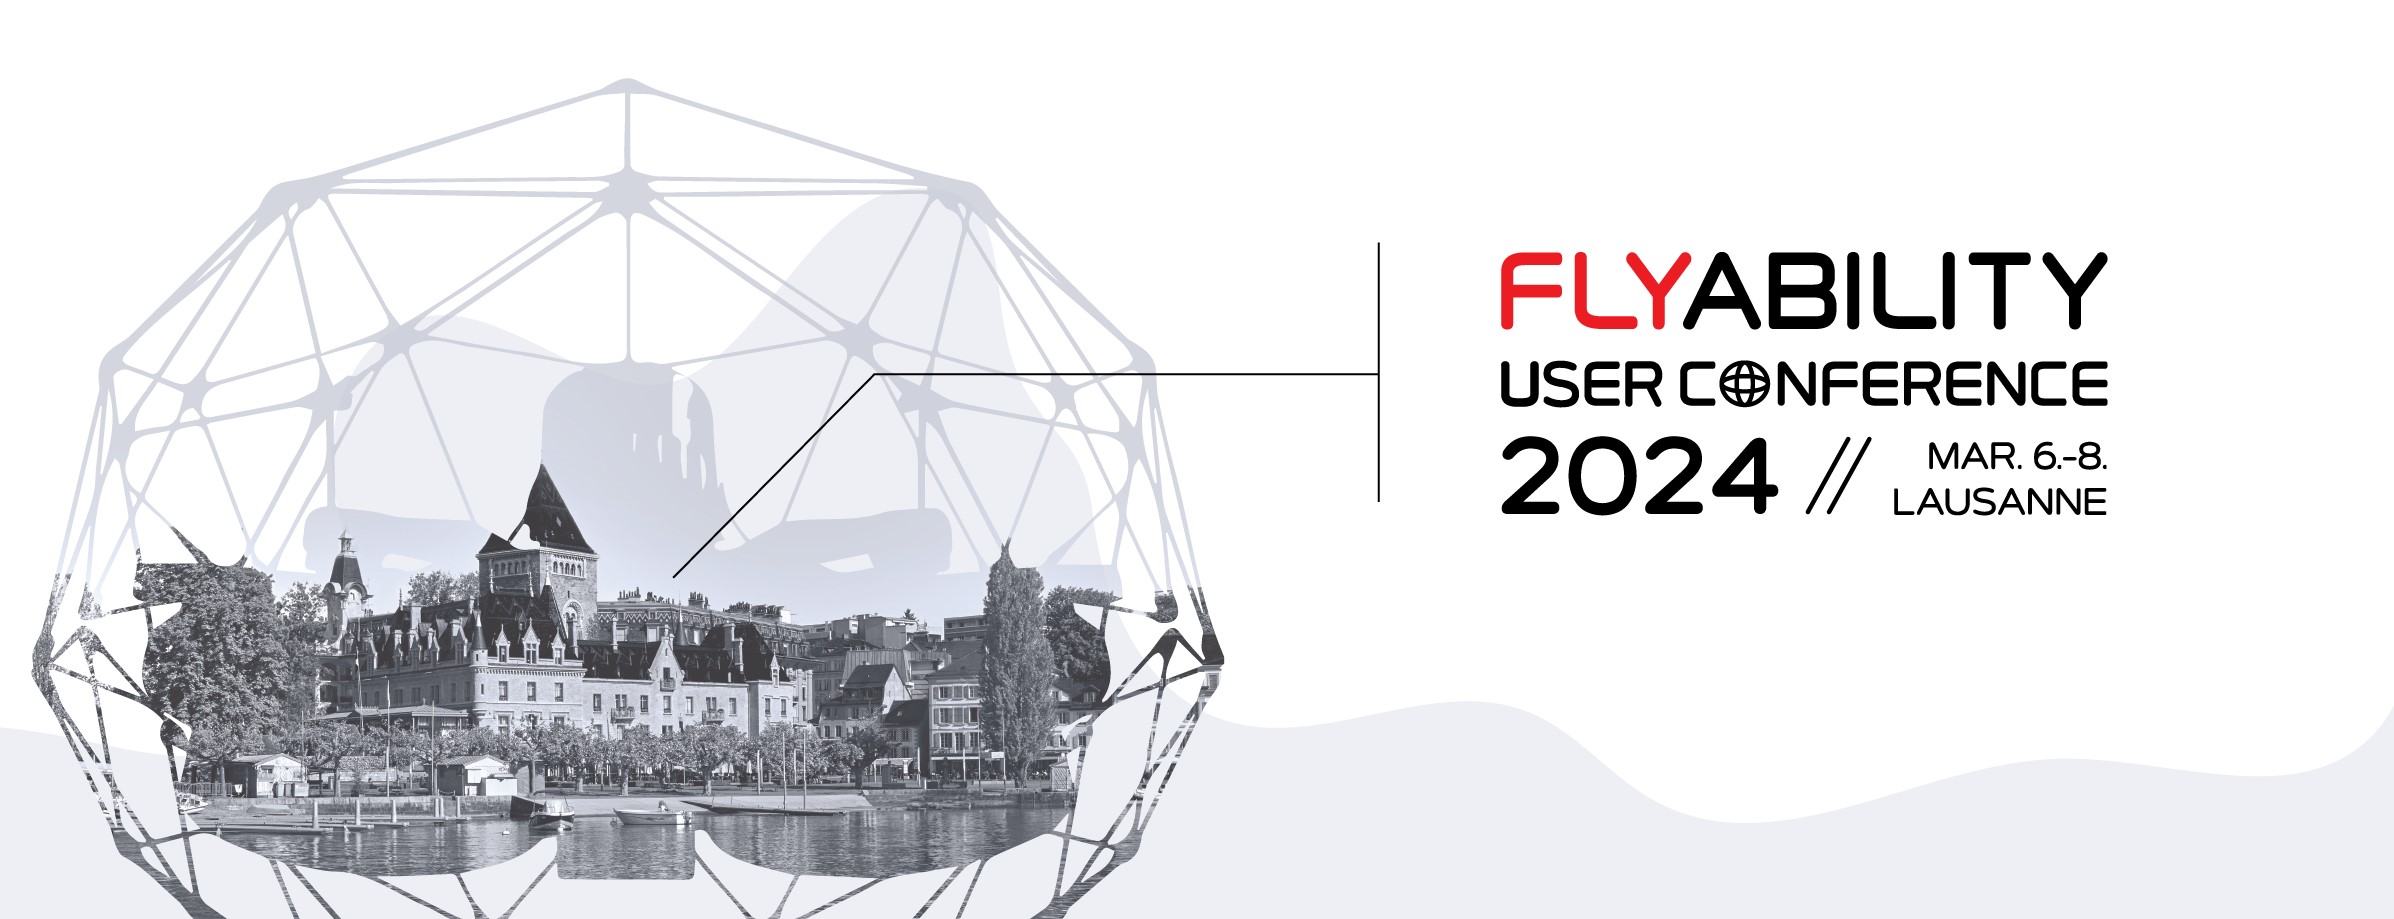 Flyability Announces 2024 User Conference